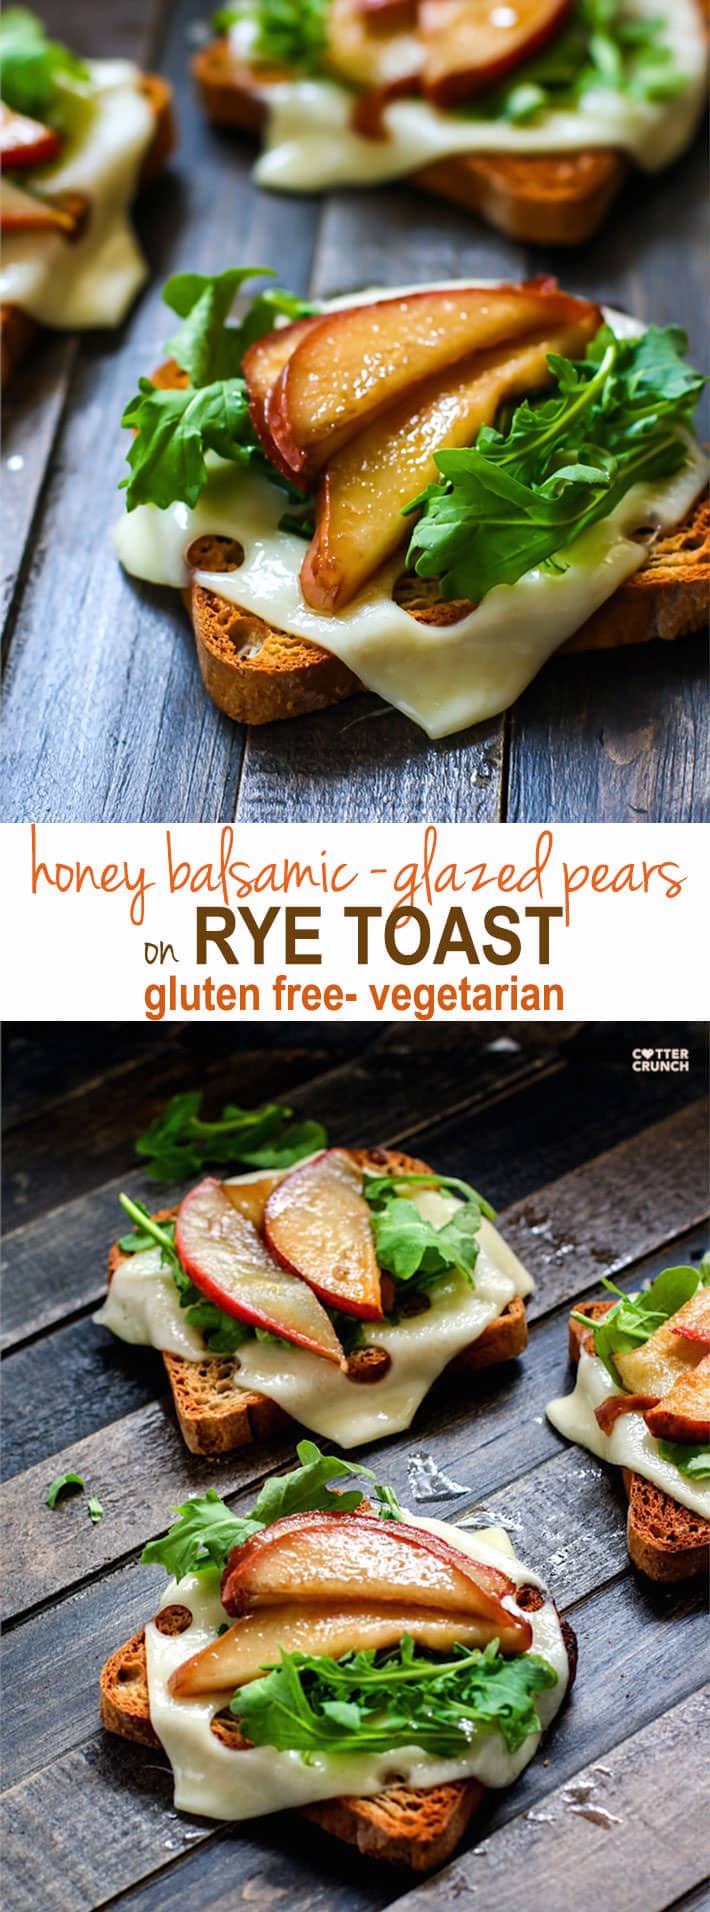 Honey Balsamic-glazed pears with Swiss Cheese and arugula on @udisglutenfree Gluten Free Rye toast! A delicious vegetarian meal great for a quick lunch, appetizer, or even a post workout snack! Balanced with whole grain gluten free carbs, protein, and healthy fats!